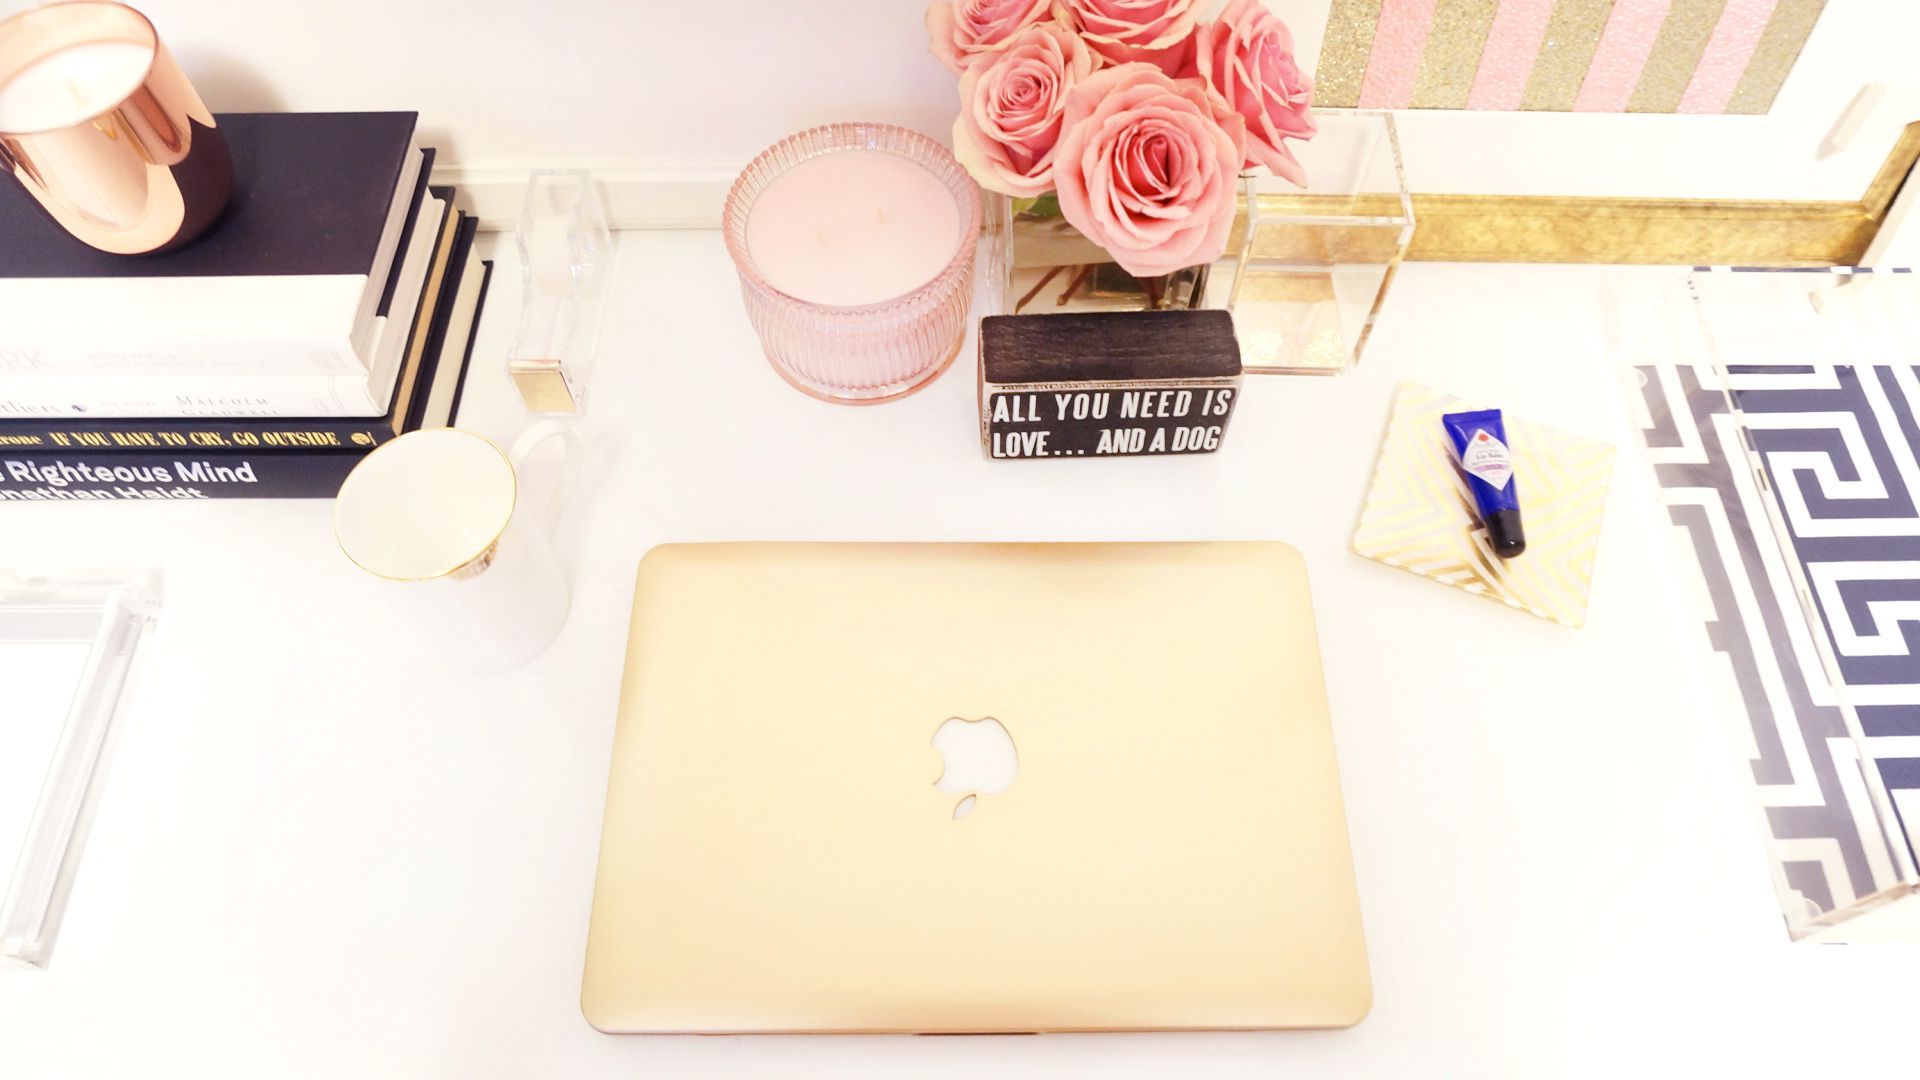 Gold Macbook Pro to match her desk – gorgeous! The case is from eBay and I definitely need to pick myself up one!